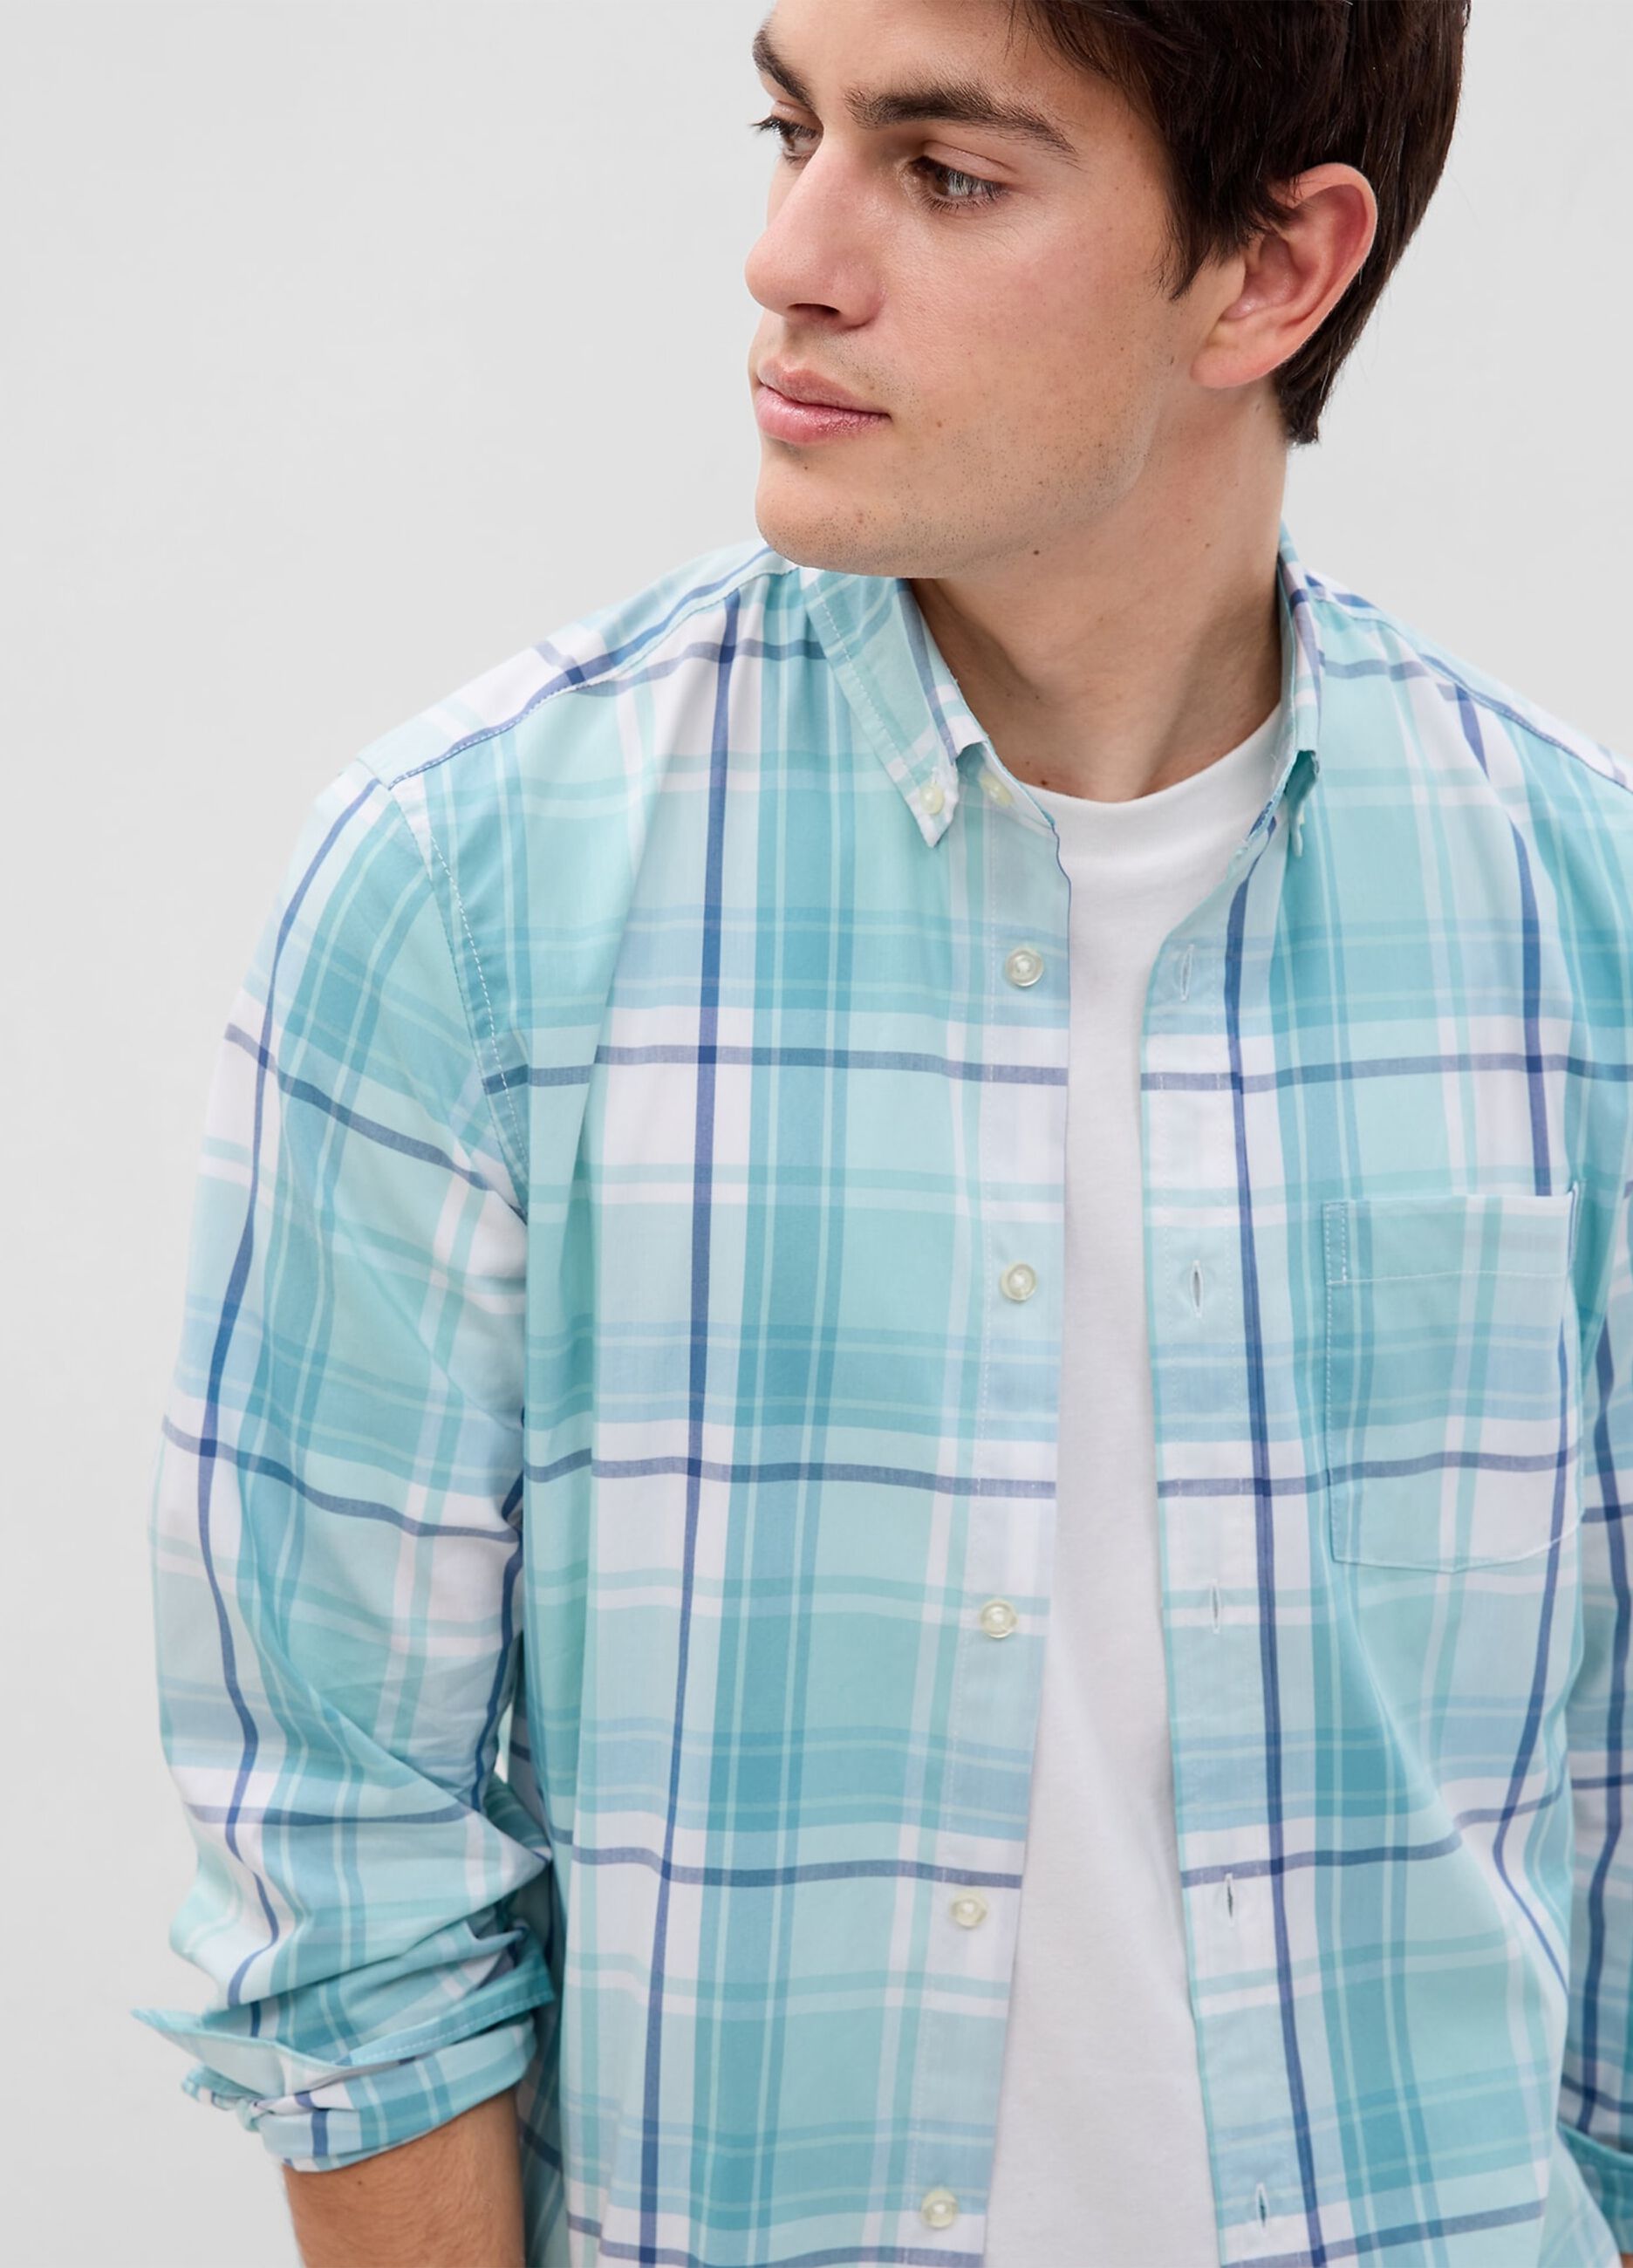 Coolmax® fabric patterned shirt